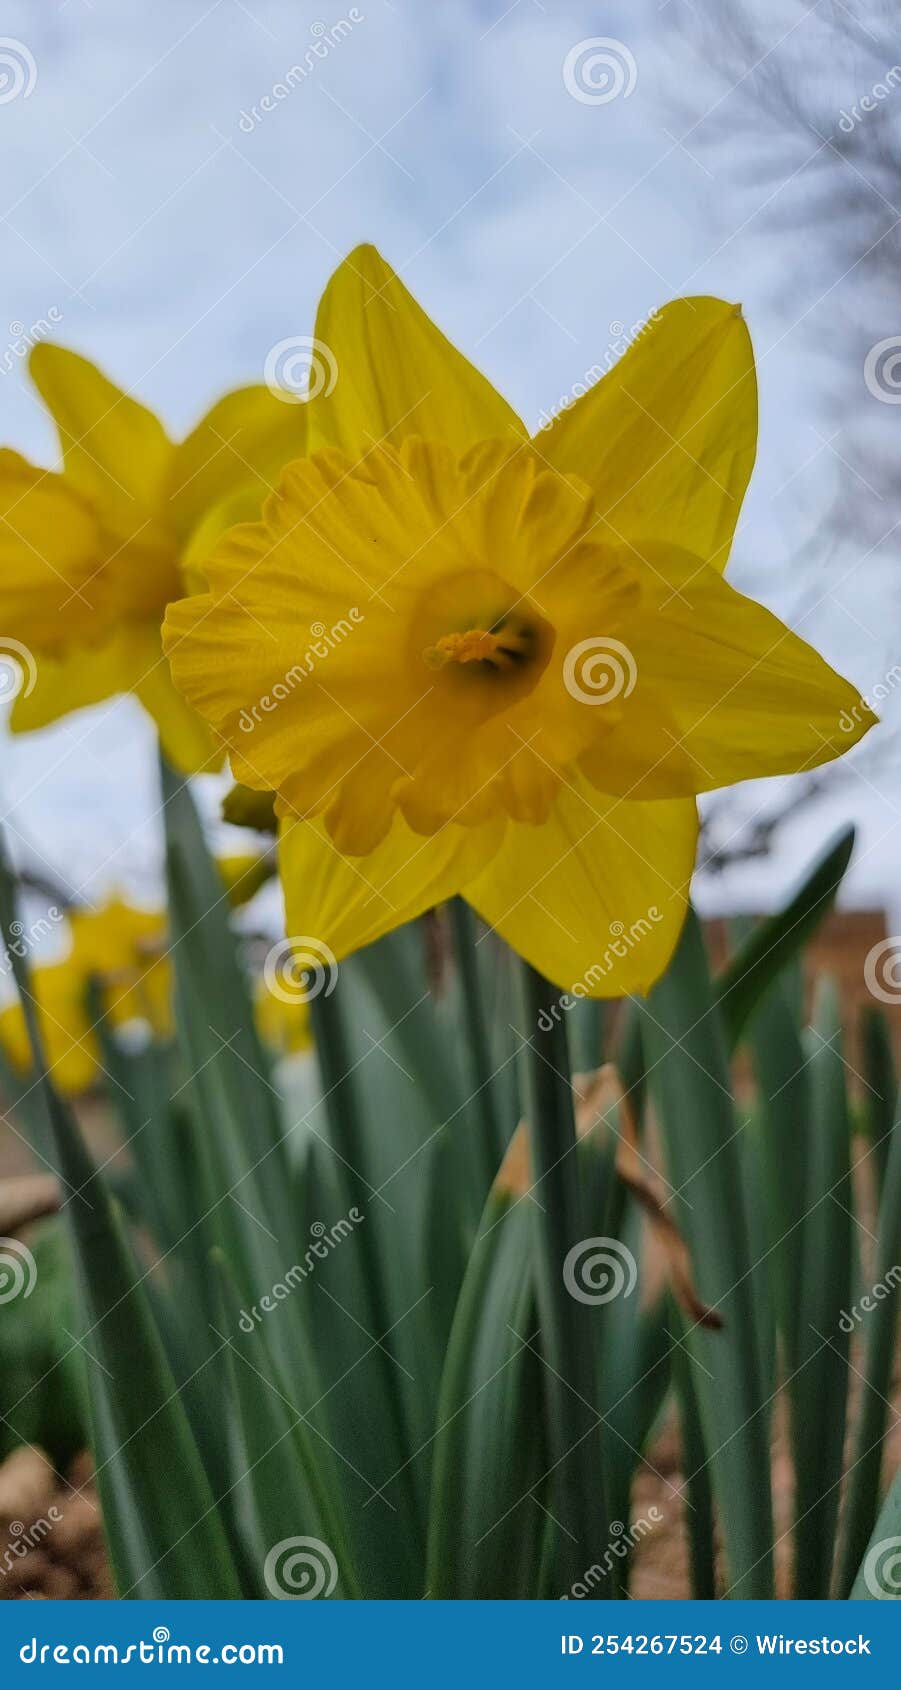 selective focus of a wild daffodil (narciso amarillo) in a green field